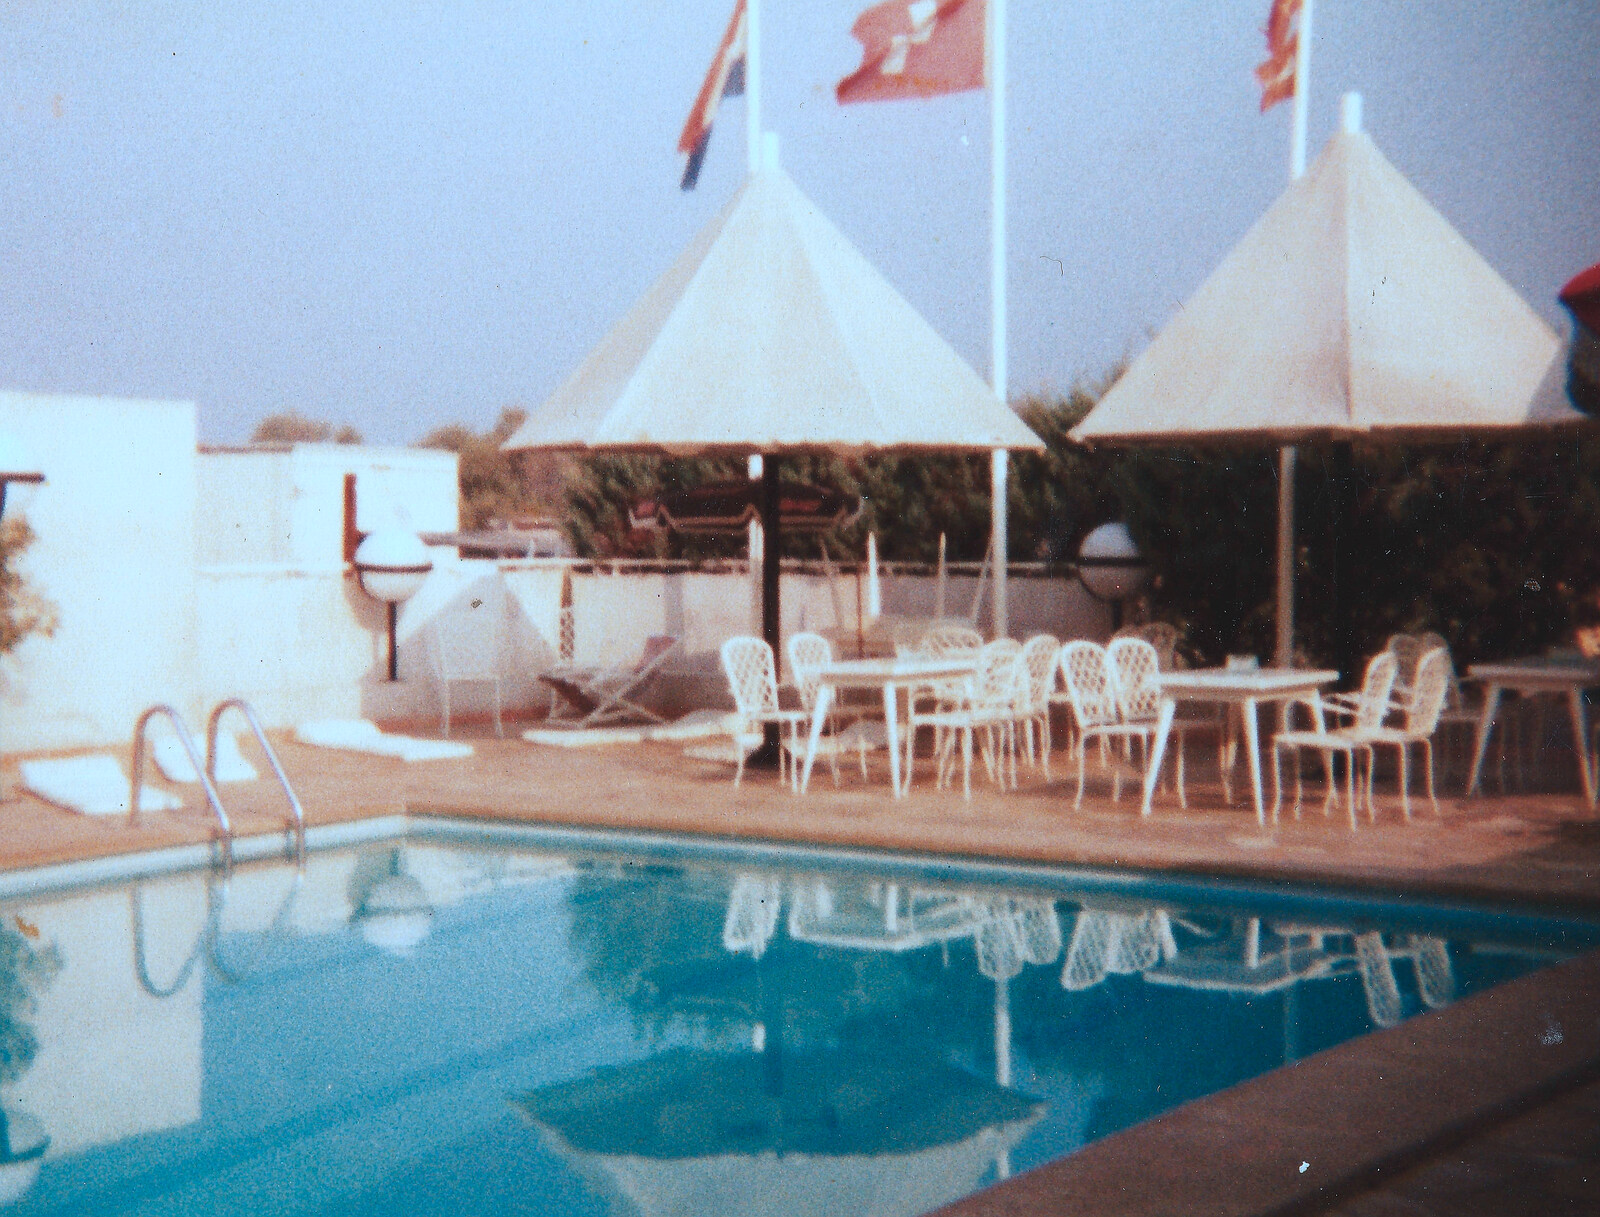 La Marine II's pool and parasols from Camping with Sean, The Camargue, South of France, 15th July 1982